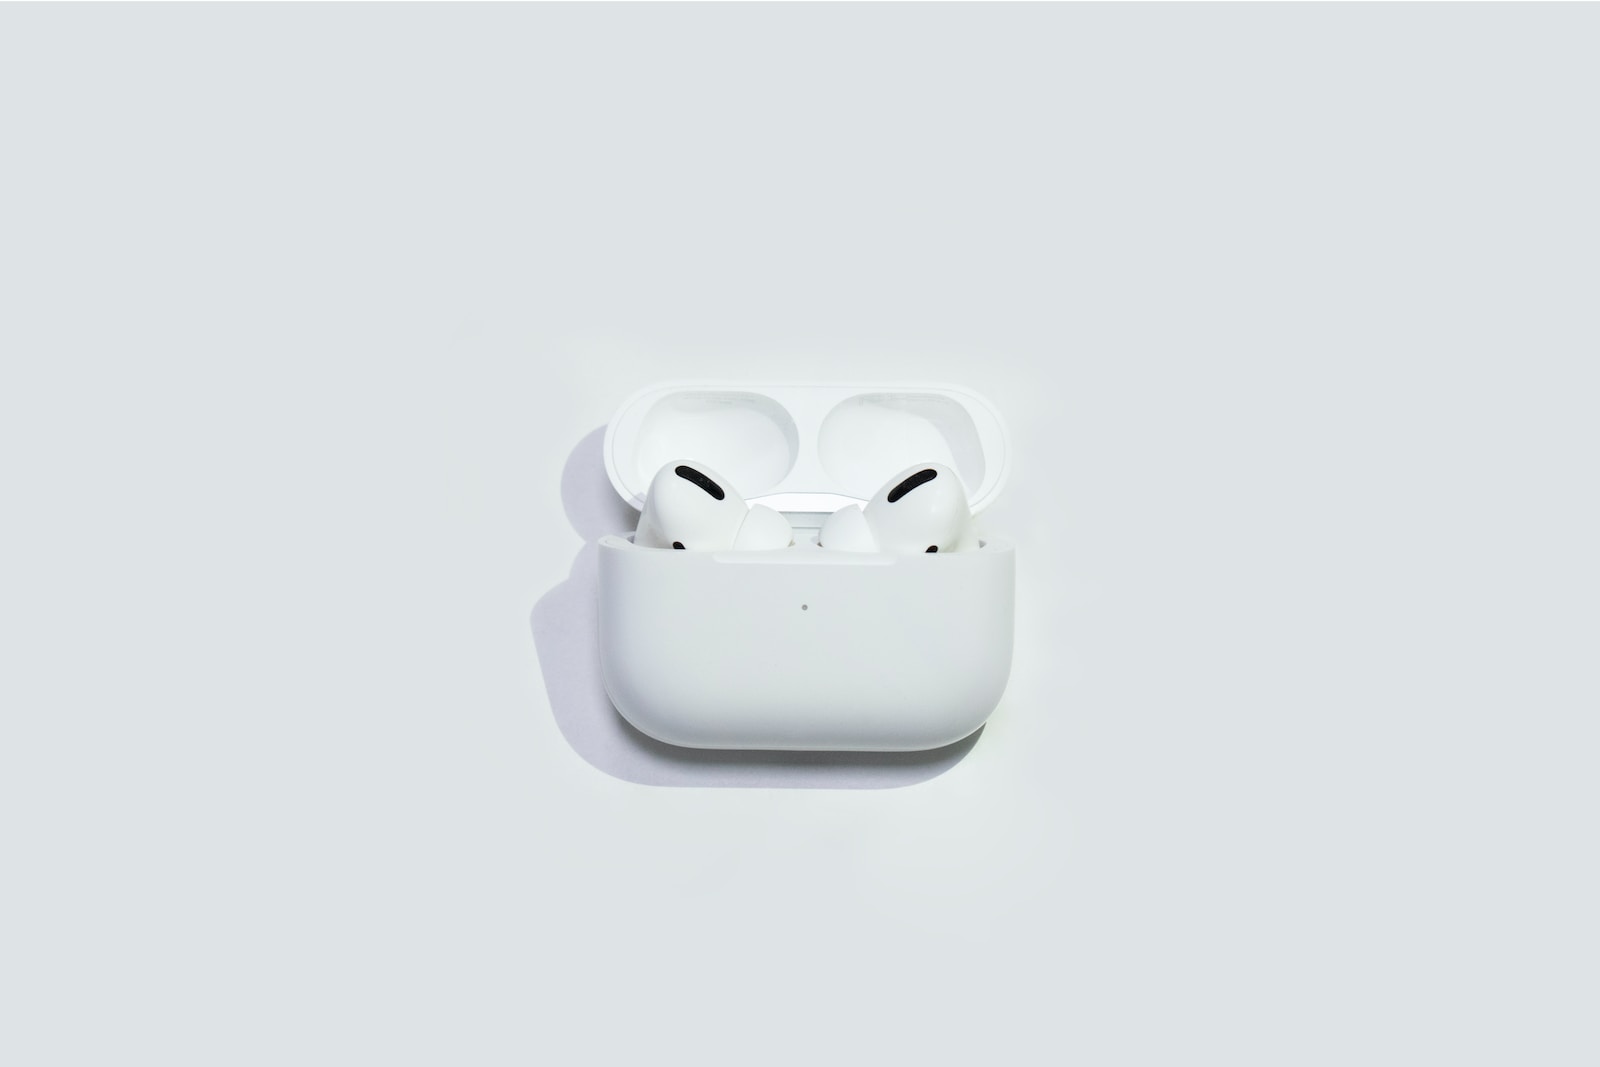 
Can Airpods Pro Be Used Without Tips? Here's What You Need to Know